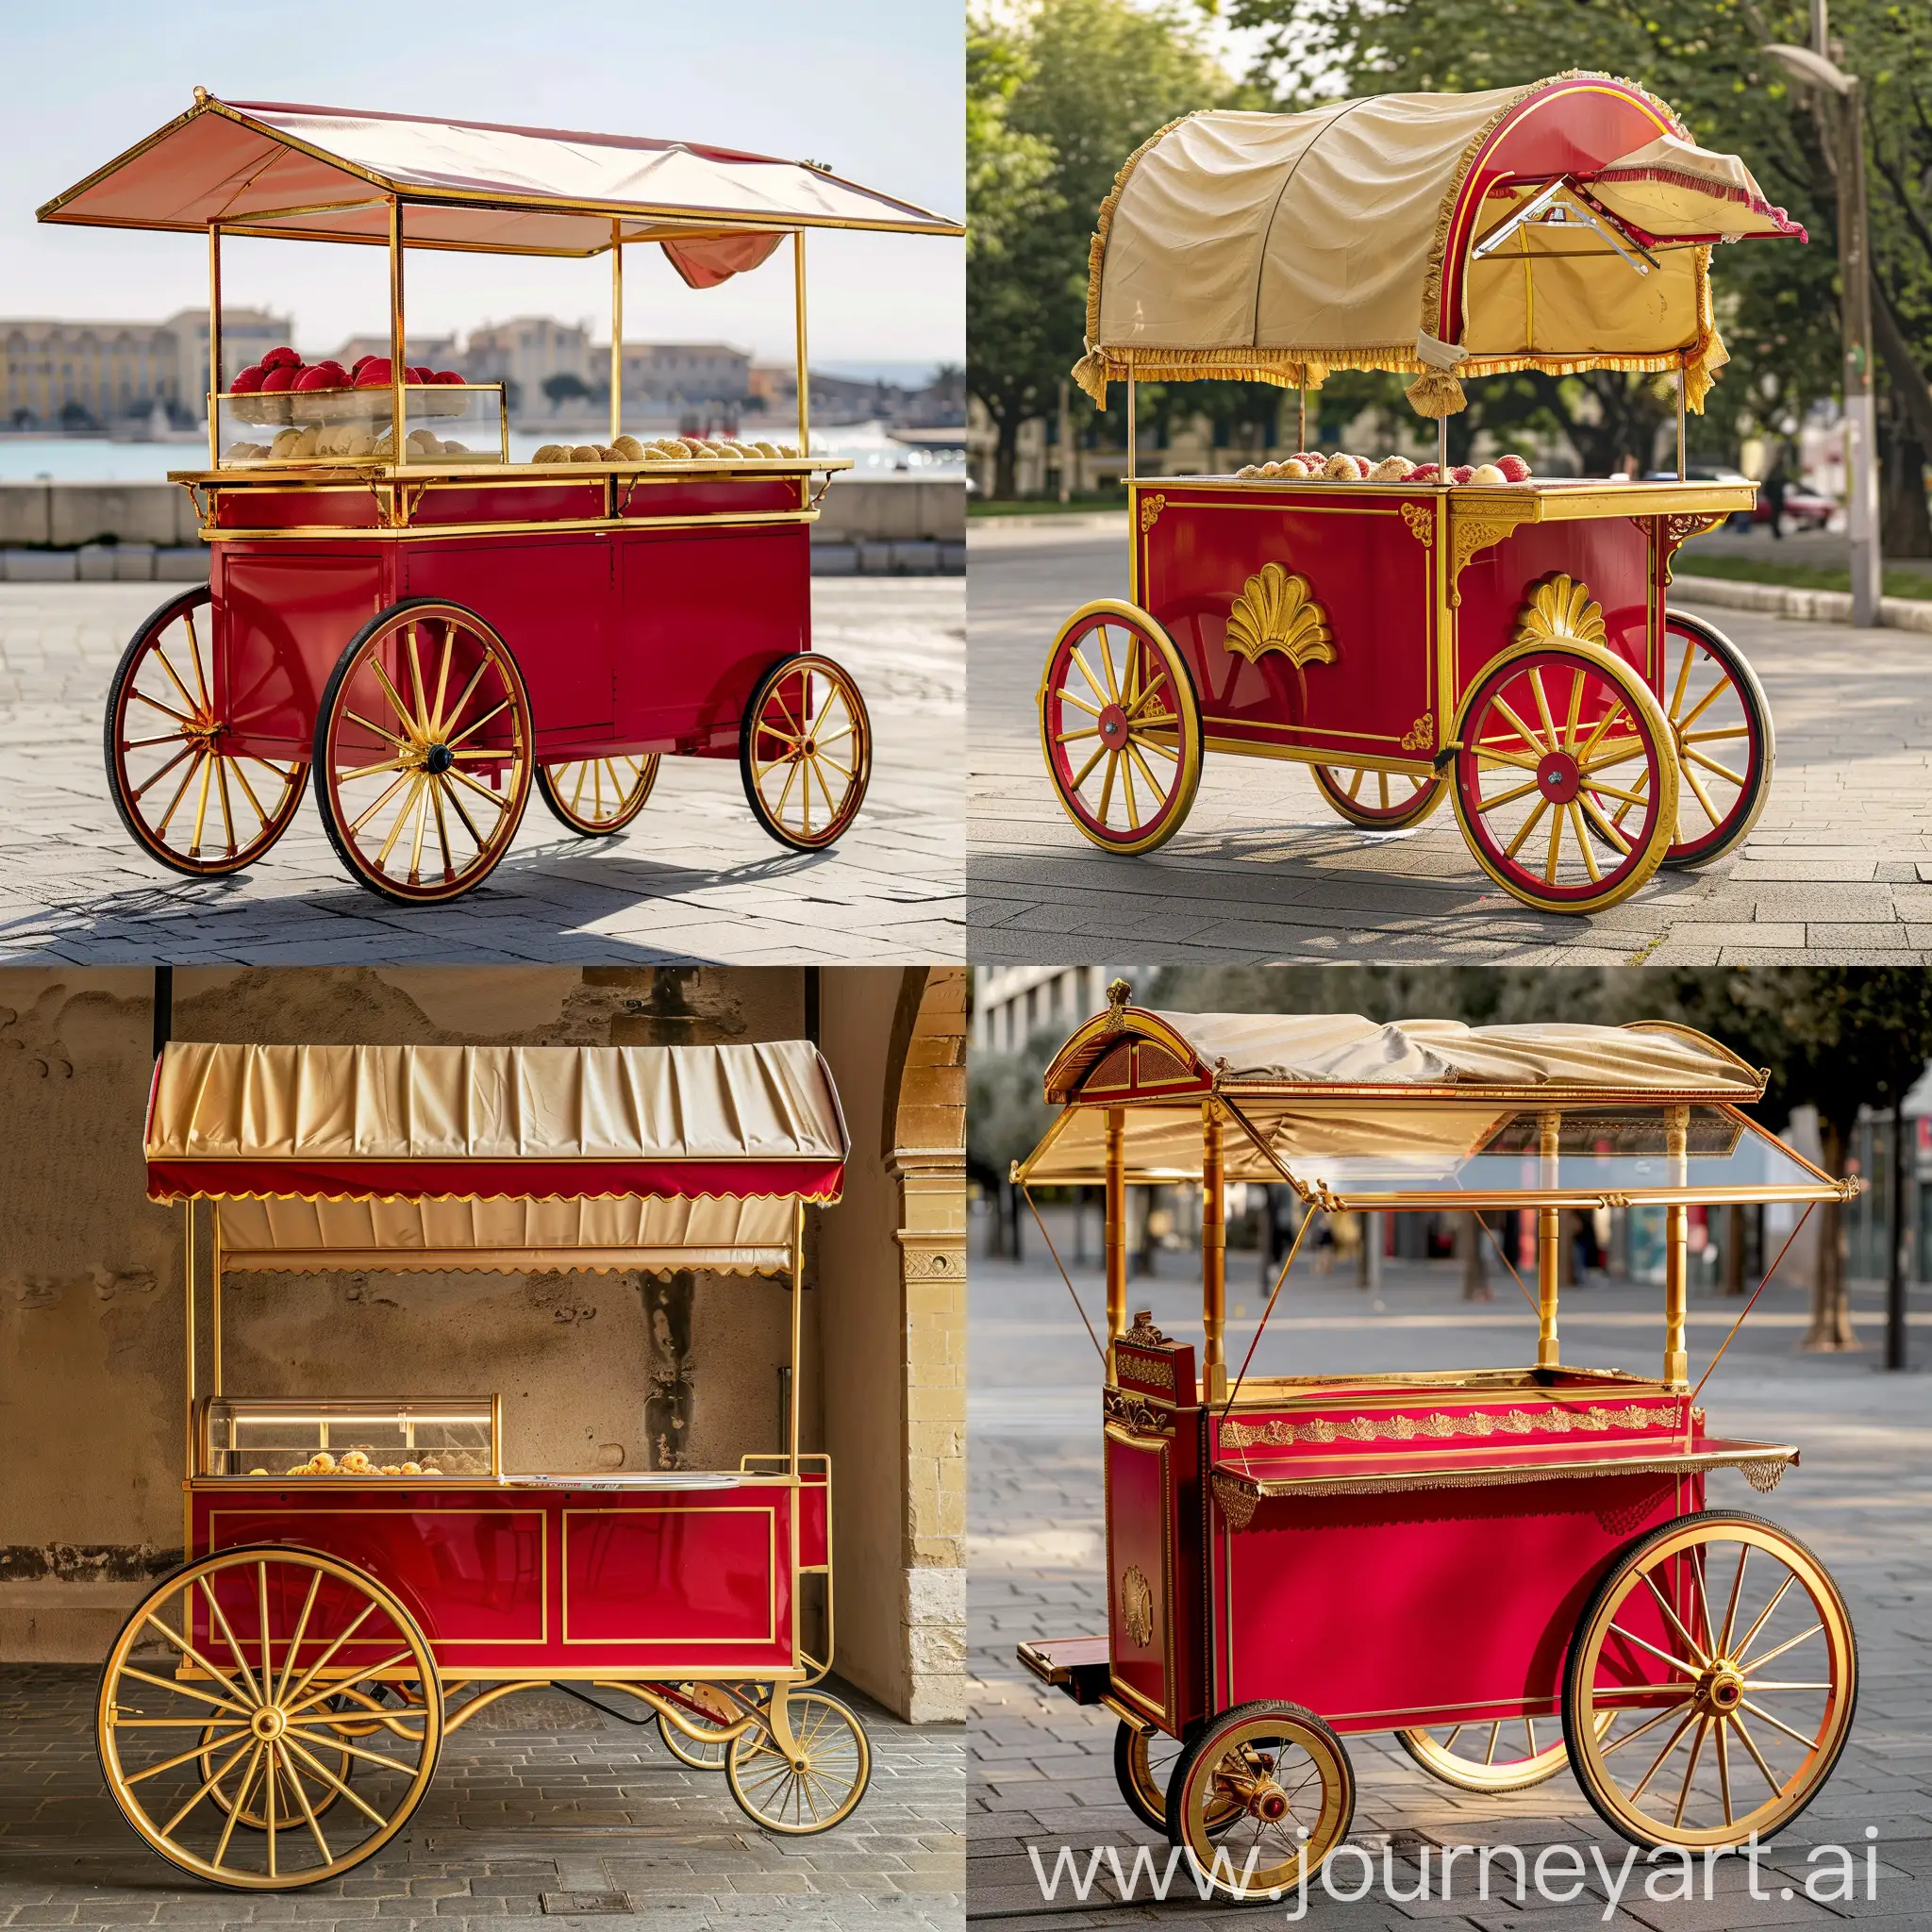 Vintage-Gelato-Cart-with-Spoked-Wheels-in-Urban-Provence-Setting